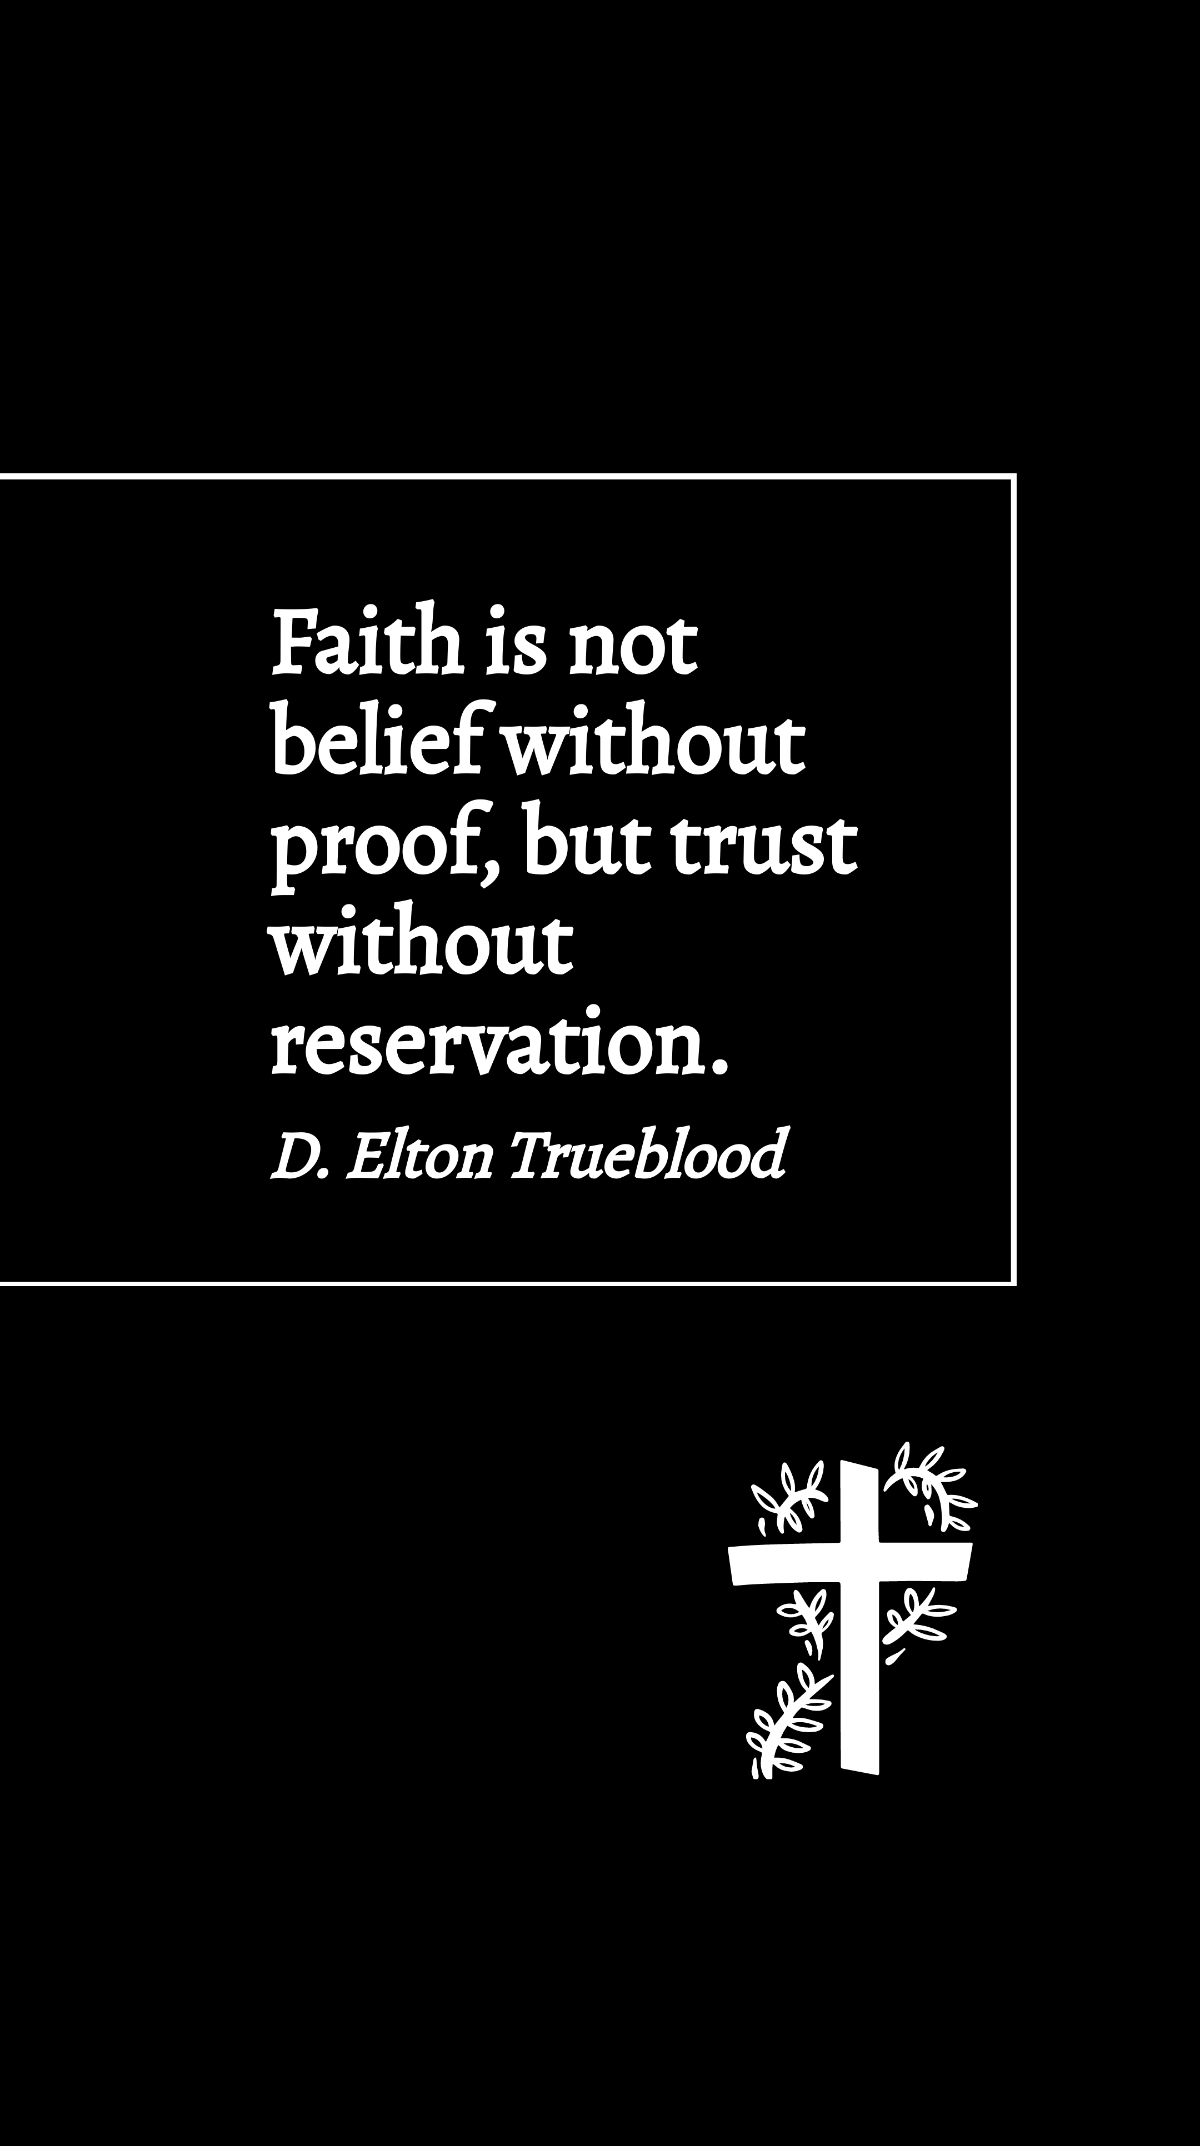 Free D. Elton Trueblood - Faith is not belief without proof, but trust without reservation. Template